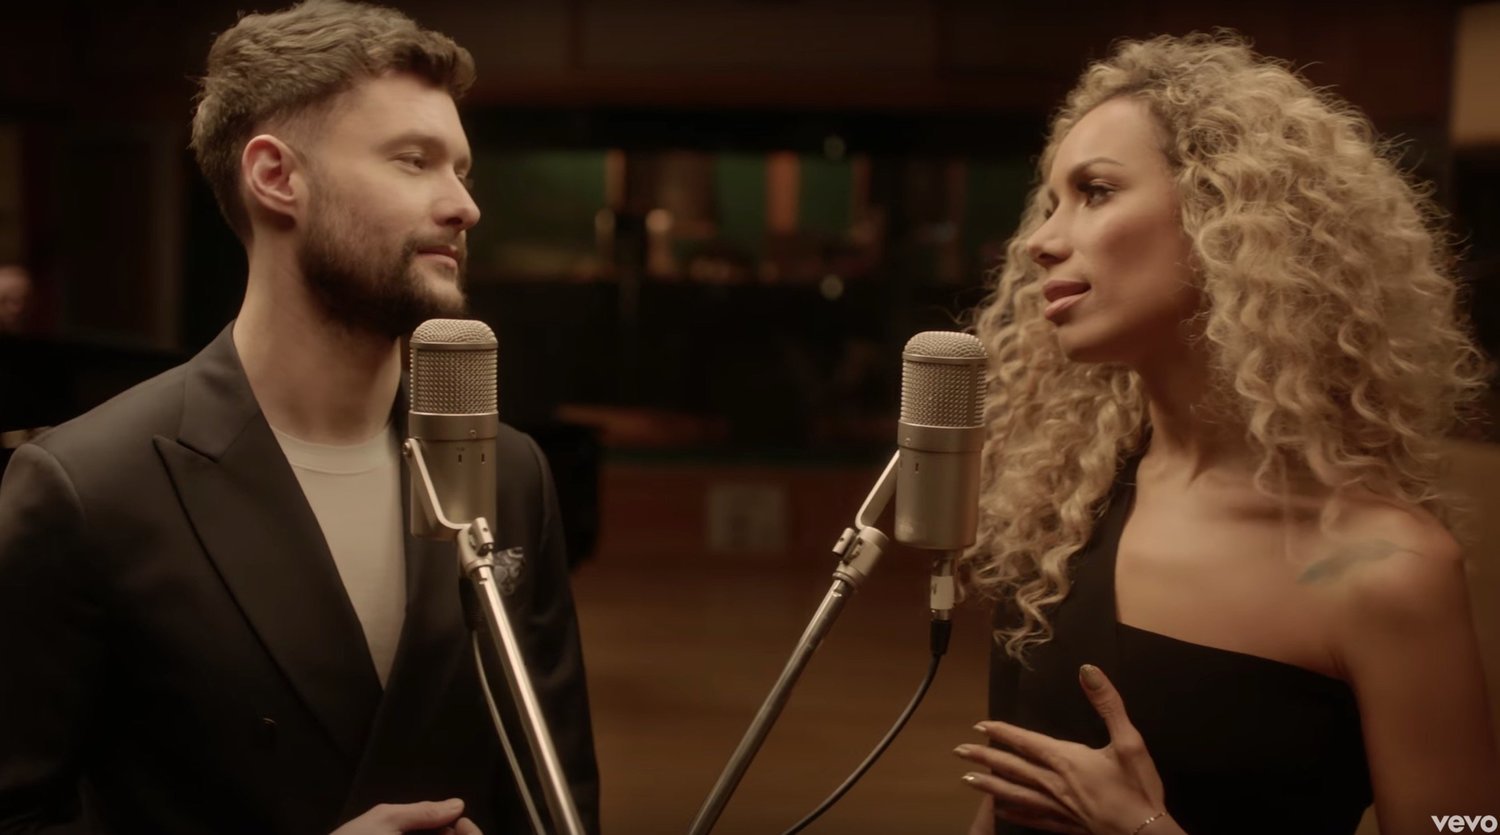 Video Calum Scott And Leona Lewis Release You Are The Reason Duet Version Music Video Video 